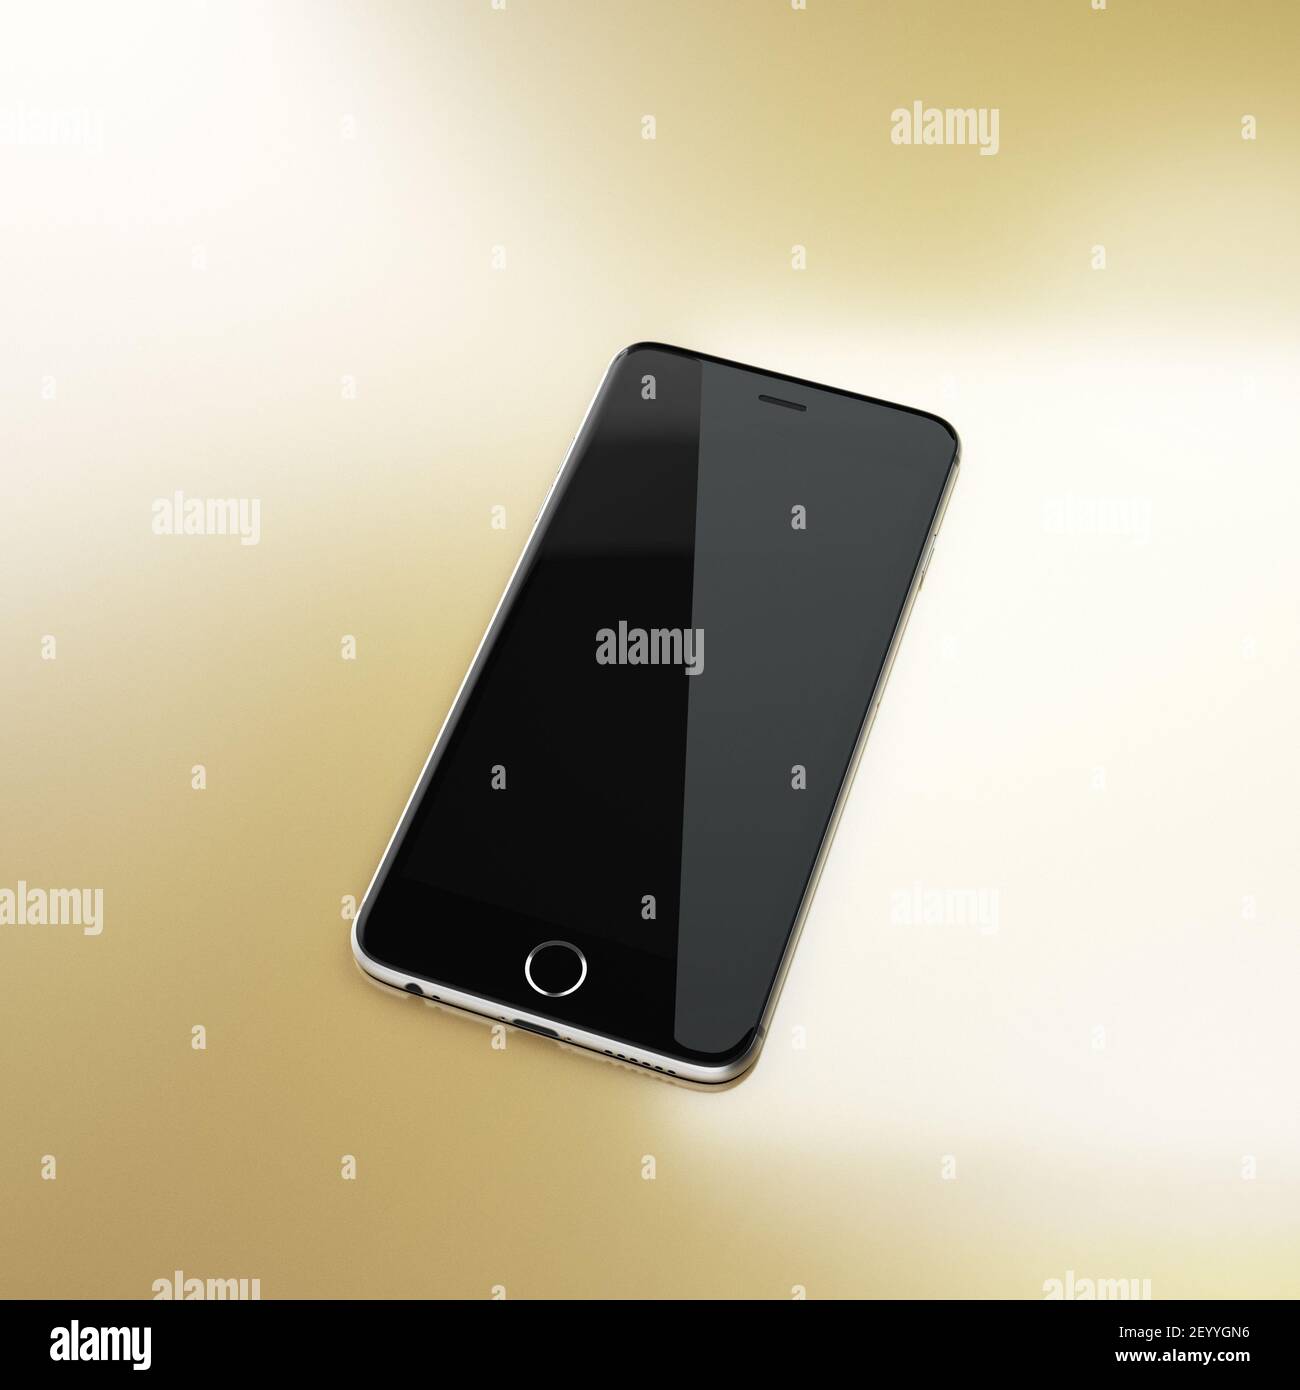 Black smart phone on abstract background. Stock Photo